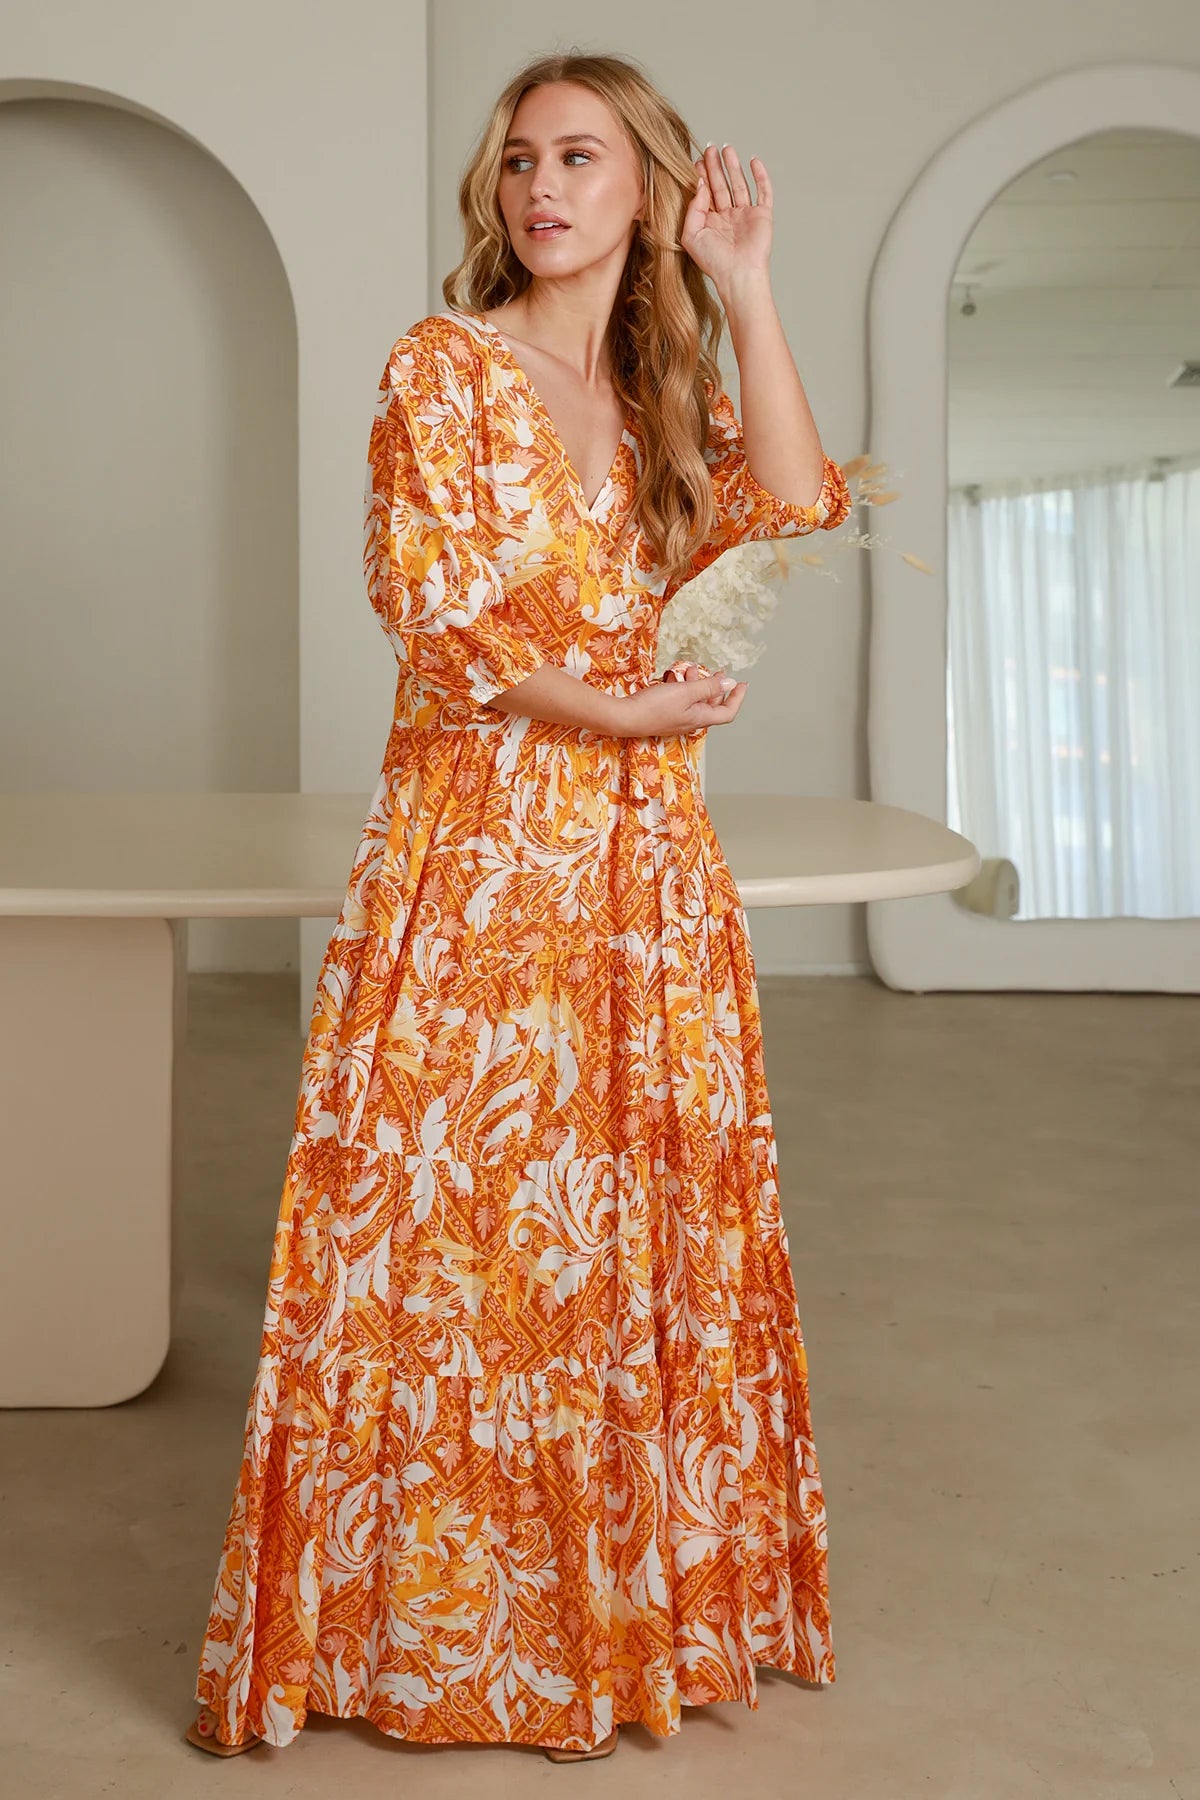 **PREORDER** Ryleigh Maxi Dress (Due early April): 
PREORDER: This item is a preorder item and on it’s way to us as we speak. Order now to secure your size and it will be sent out to you once it arrives at Ciao Bella - Ciao Bella Dresses - Dreamcatcher